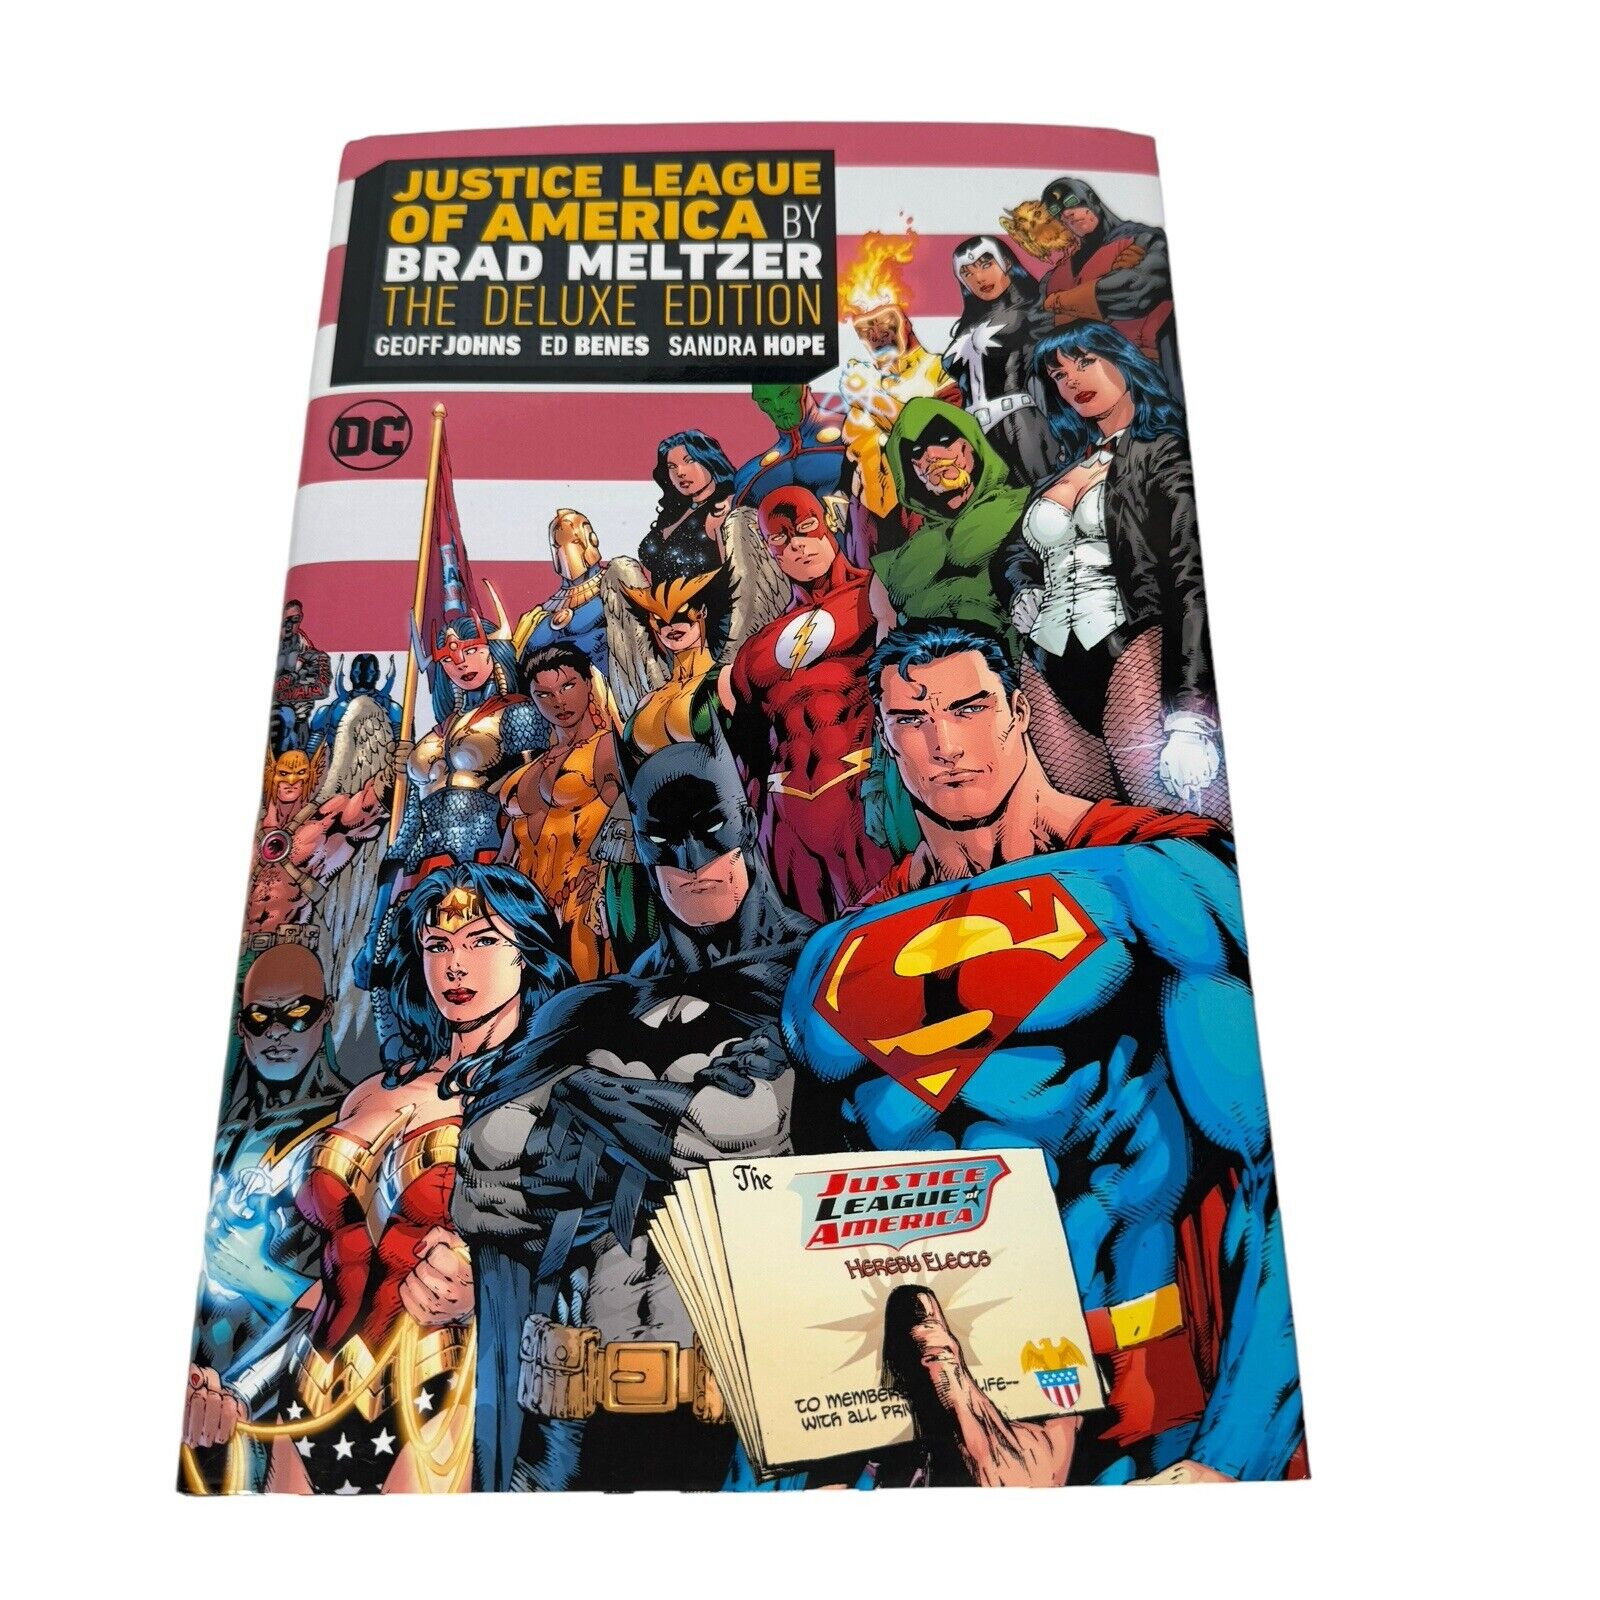 Justice League of America by Brad Meltzer: The Deluxe Edition by Brad Meltzer HC